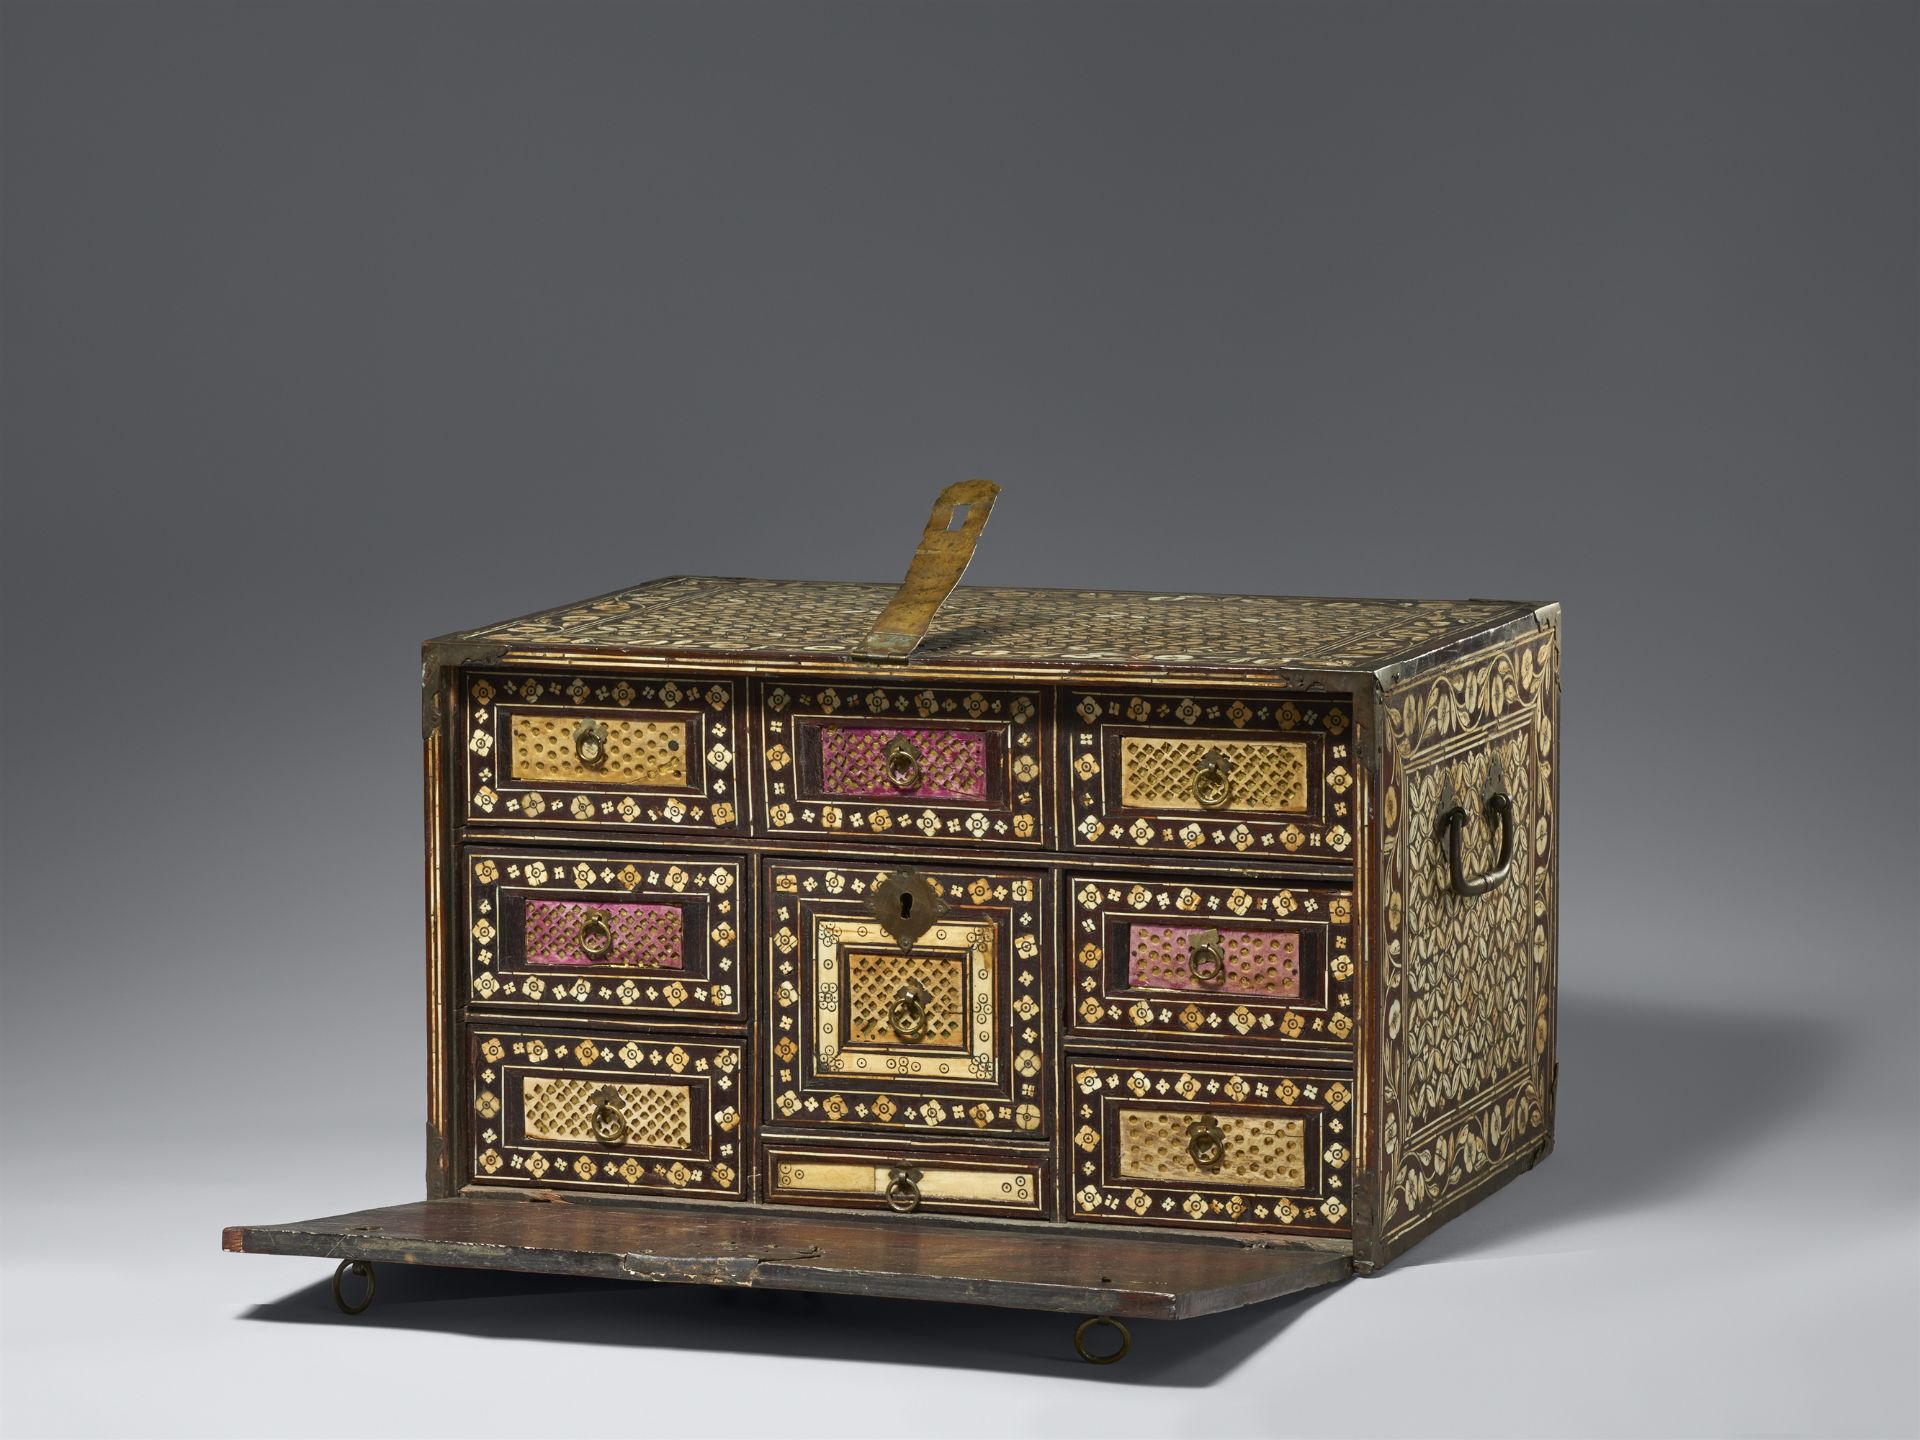 A Mughal ivory-inlaid wooden chest. Northwest-India/Pakistan, Gujarat or Sindh. 17th century